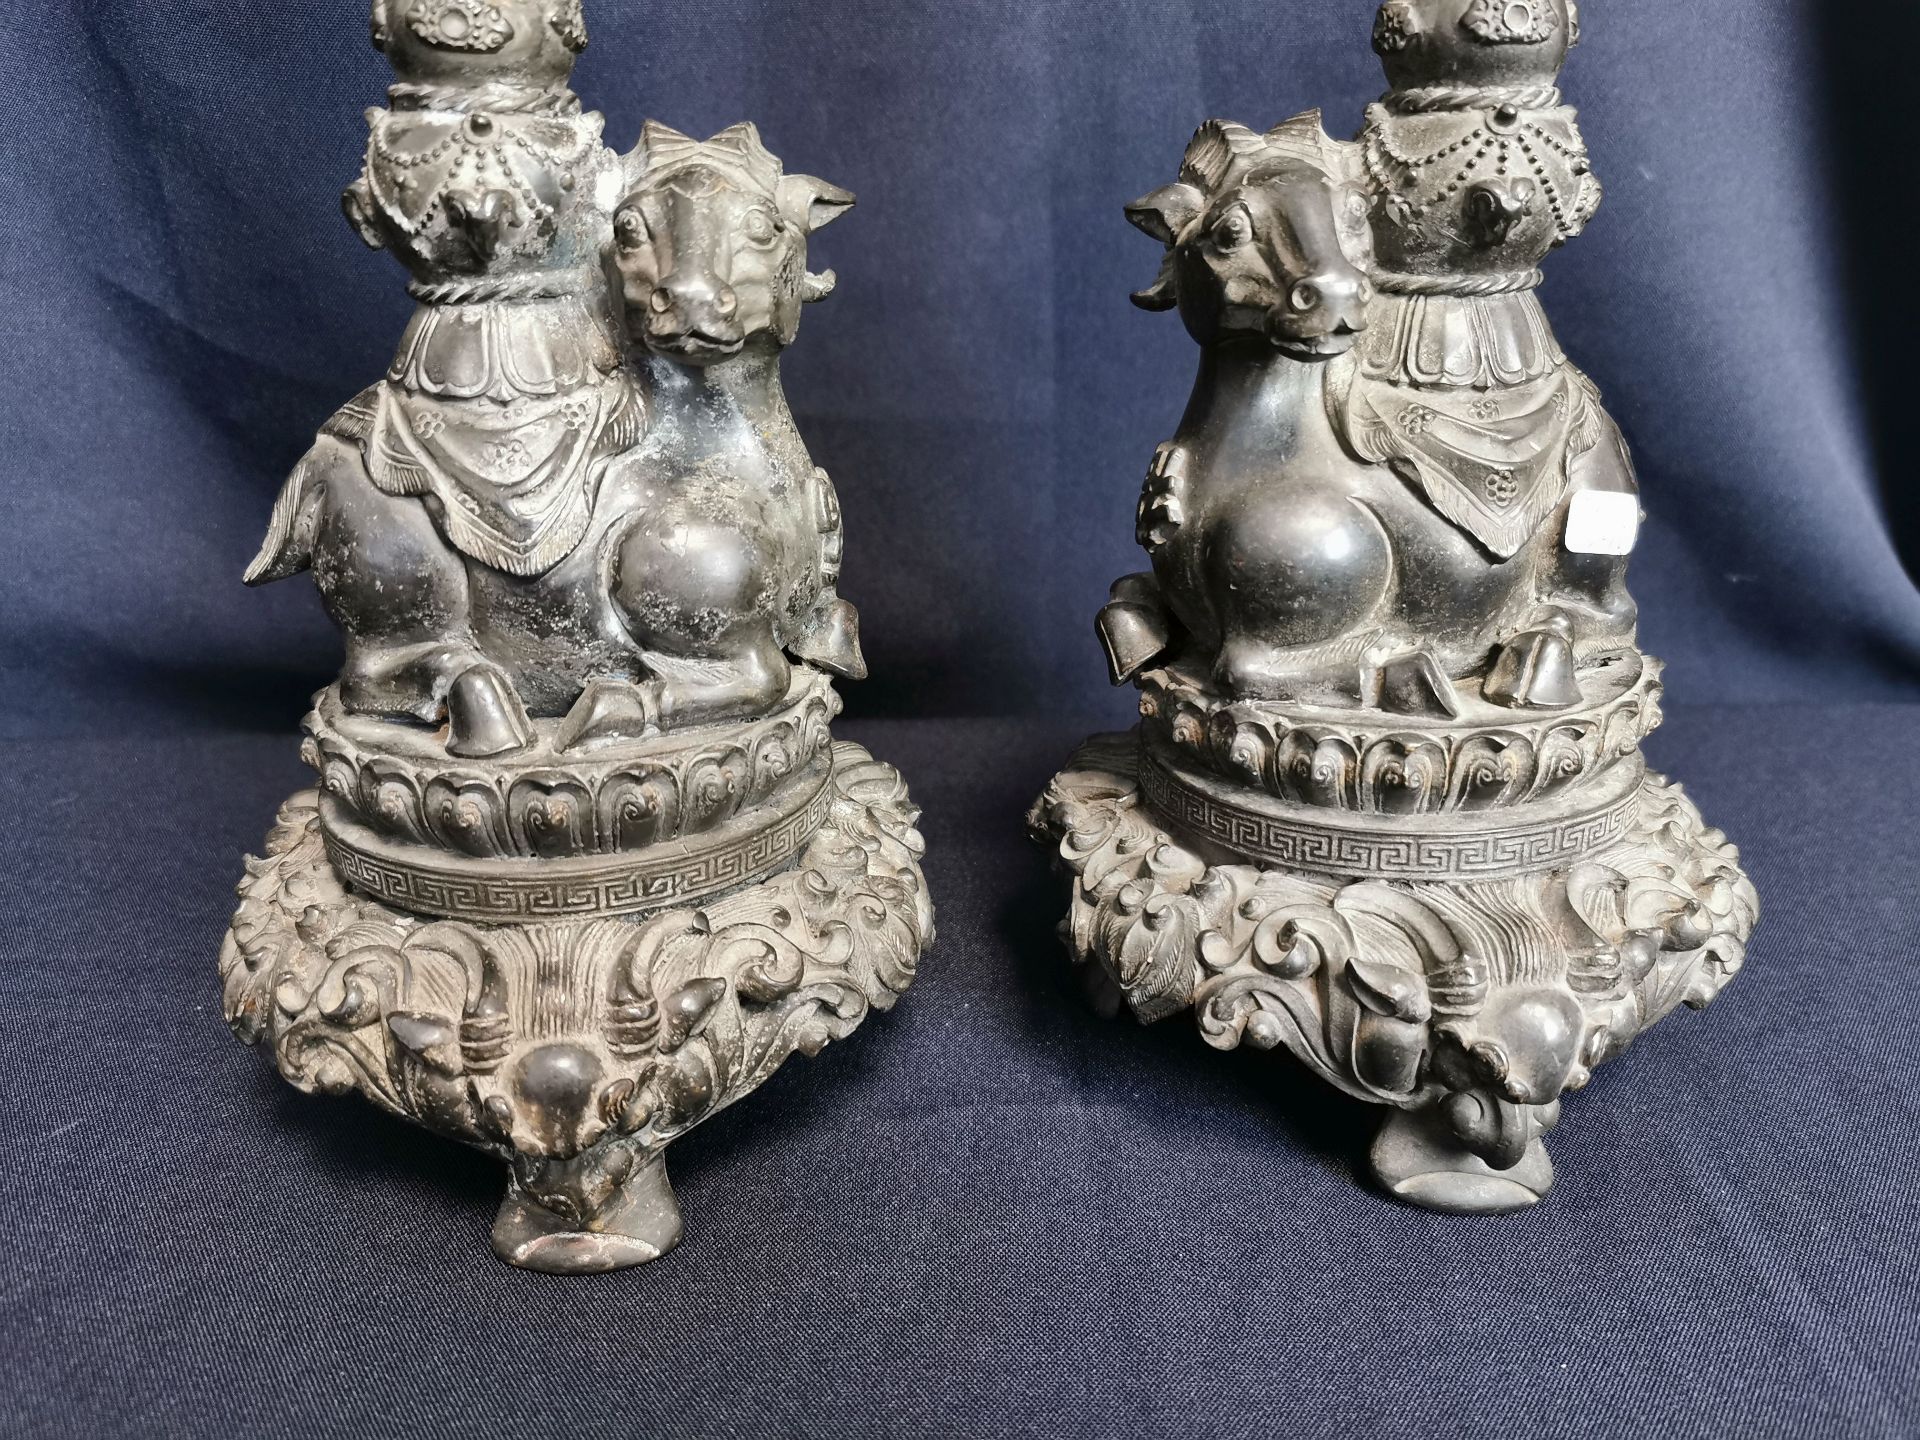 PAIR OF CANDLE STANDS WITH RAMS - Image 2 of 7